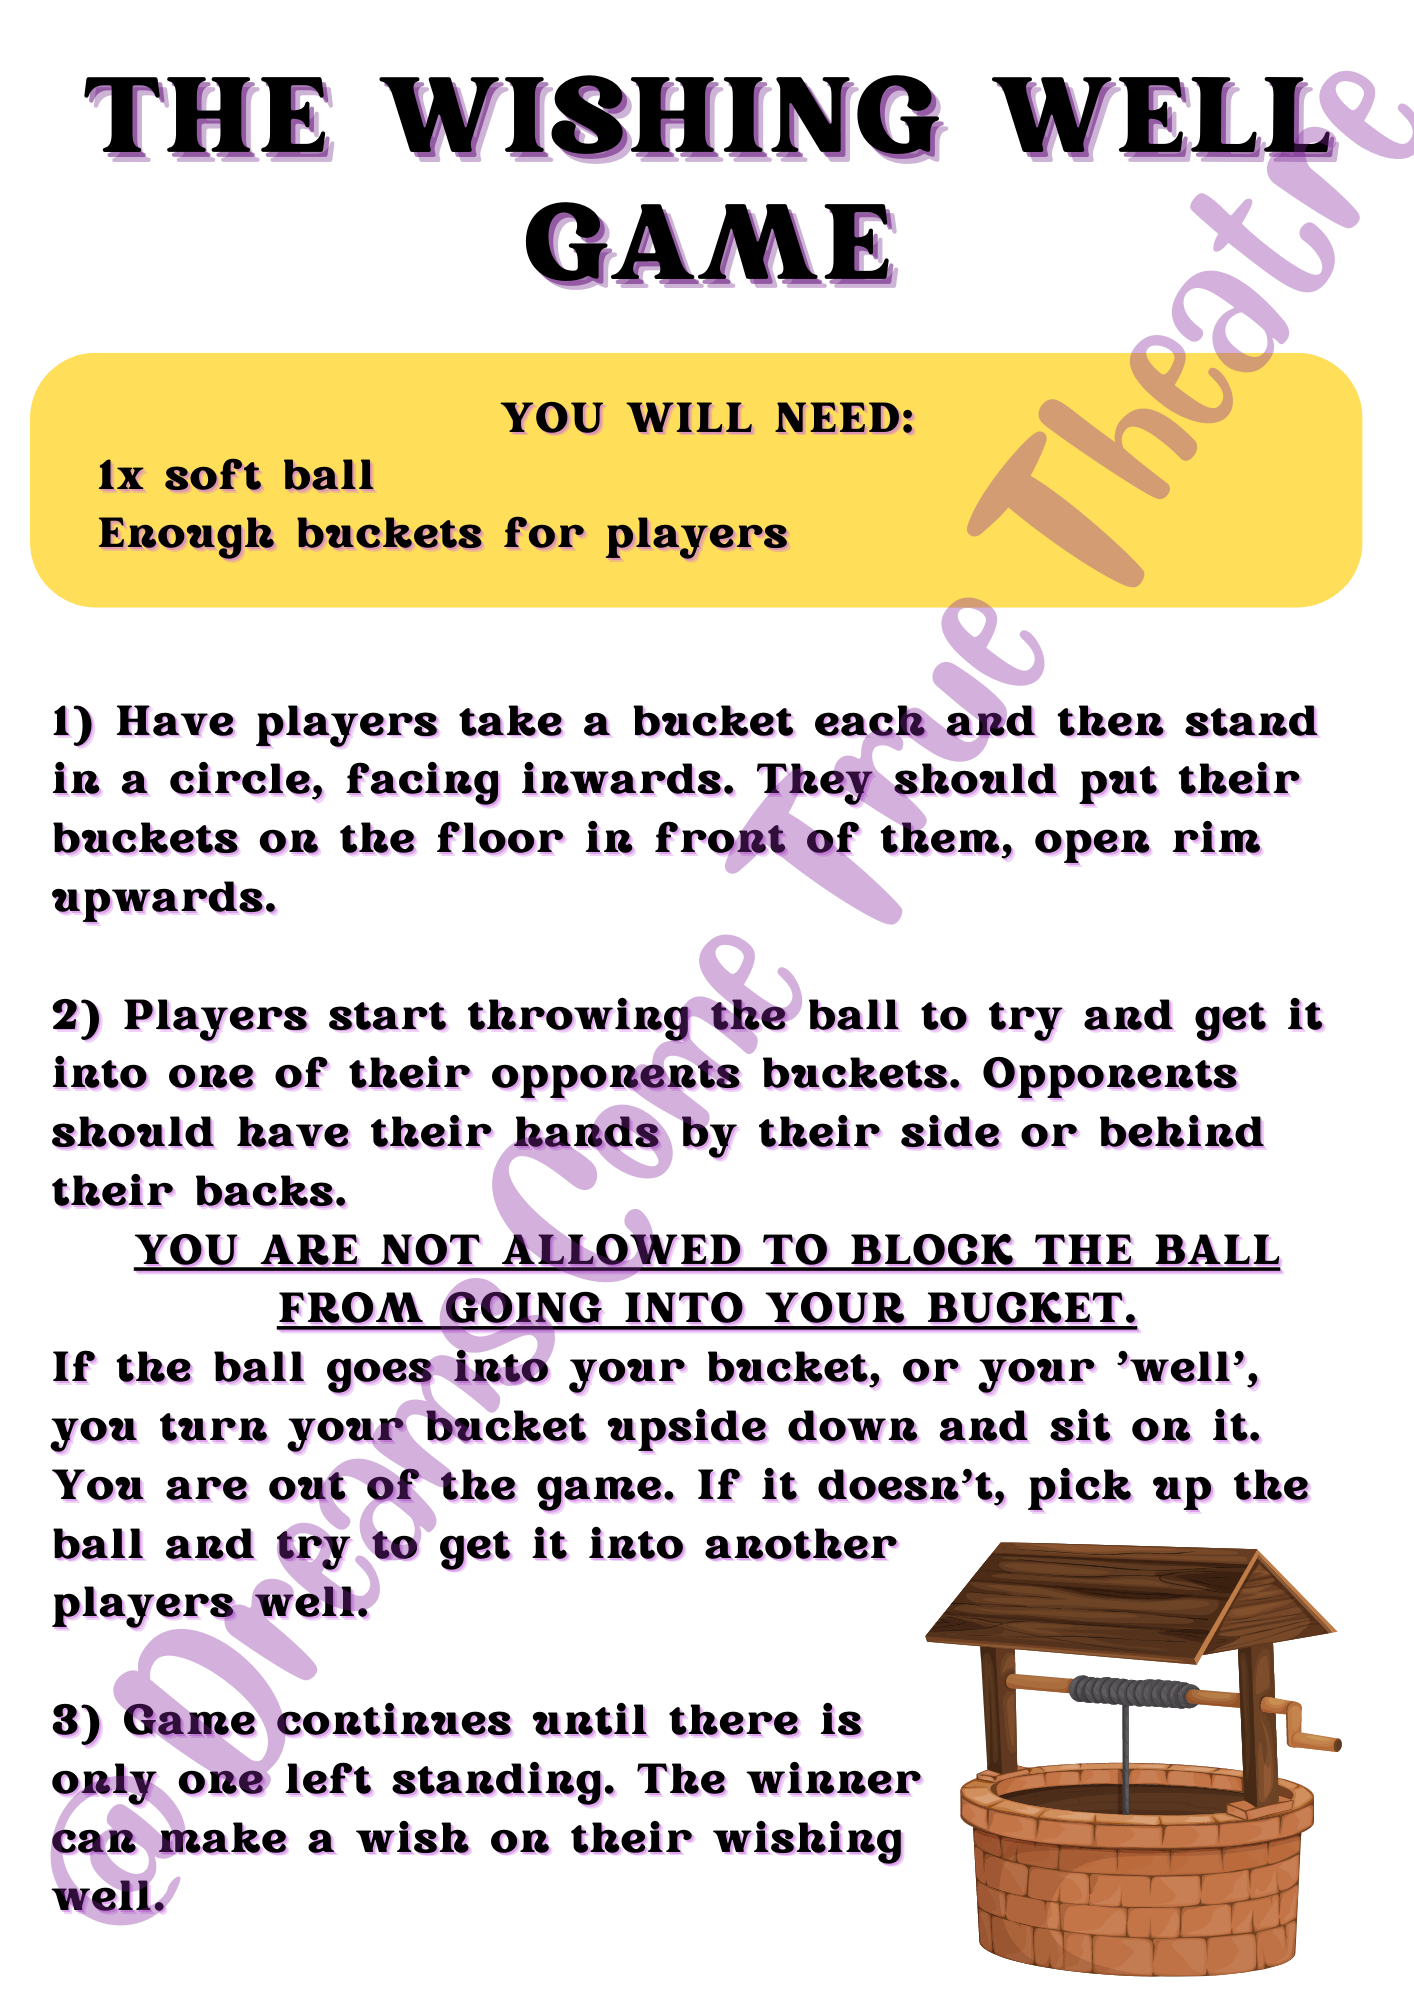 Instructions for playing 